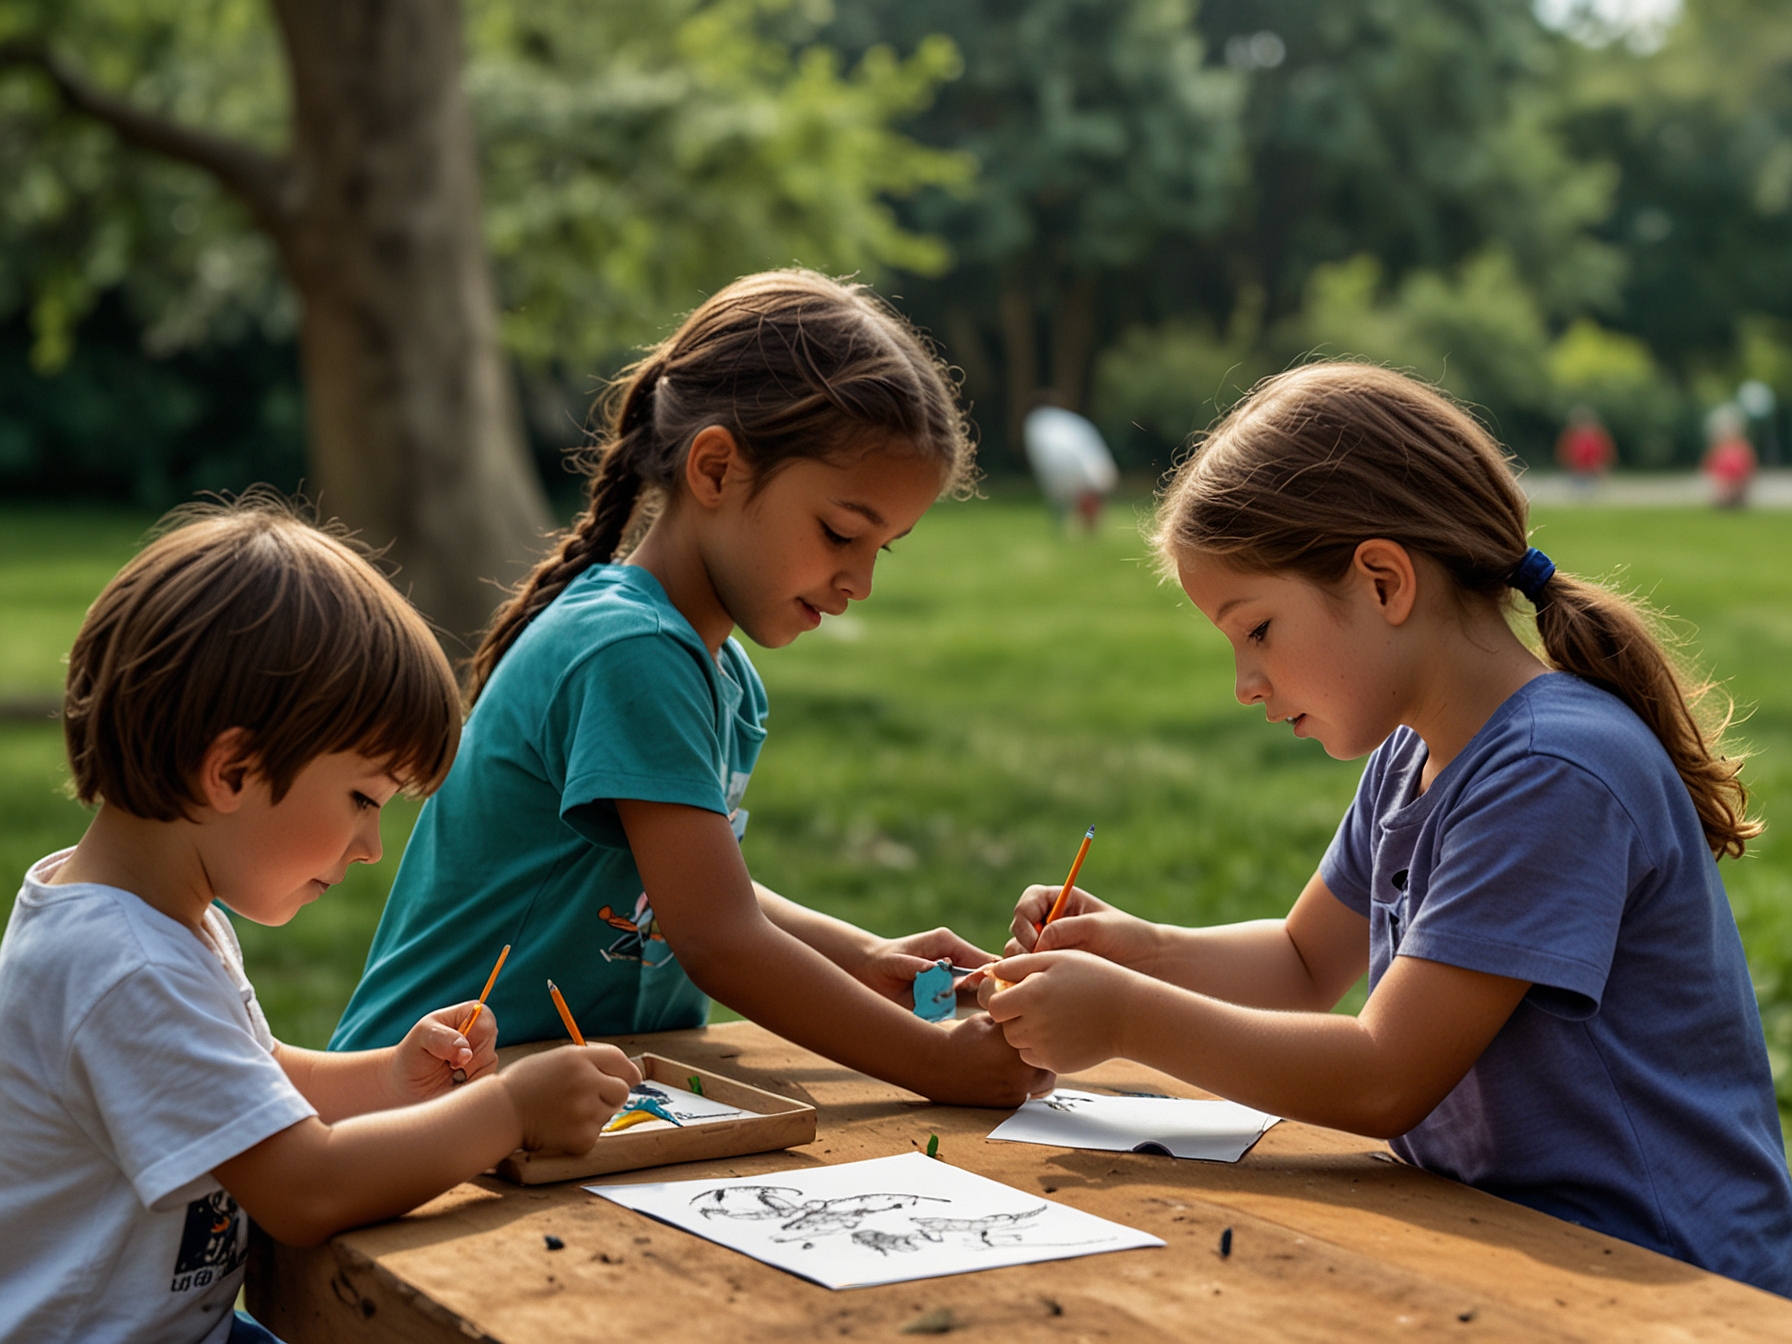 Children participating in a hands-on workshop at 'Flock Together,' creating bird-themed crafts while learning about local avian species. The activity station is outdoors with a backdrop of lush park scenery.